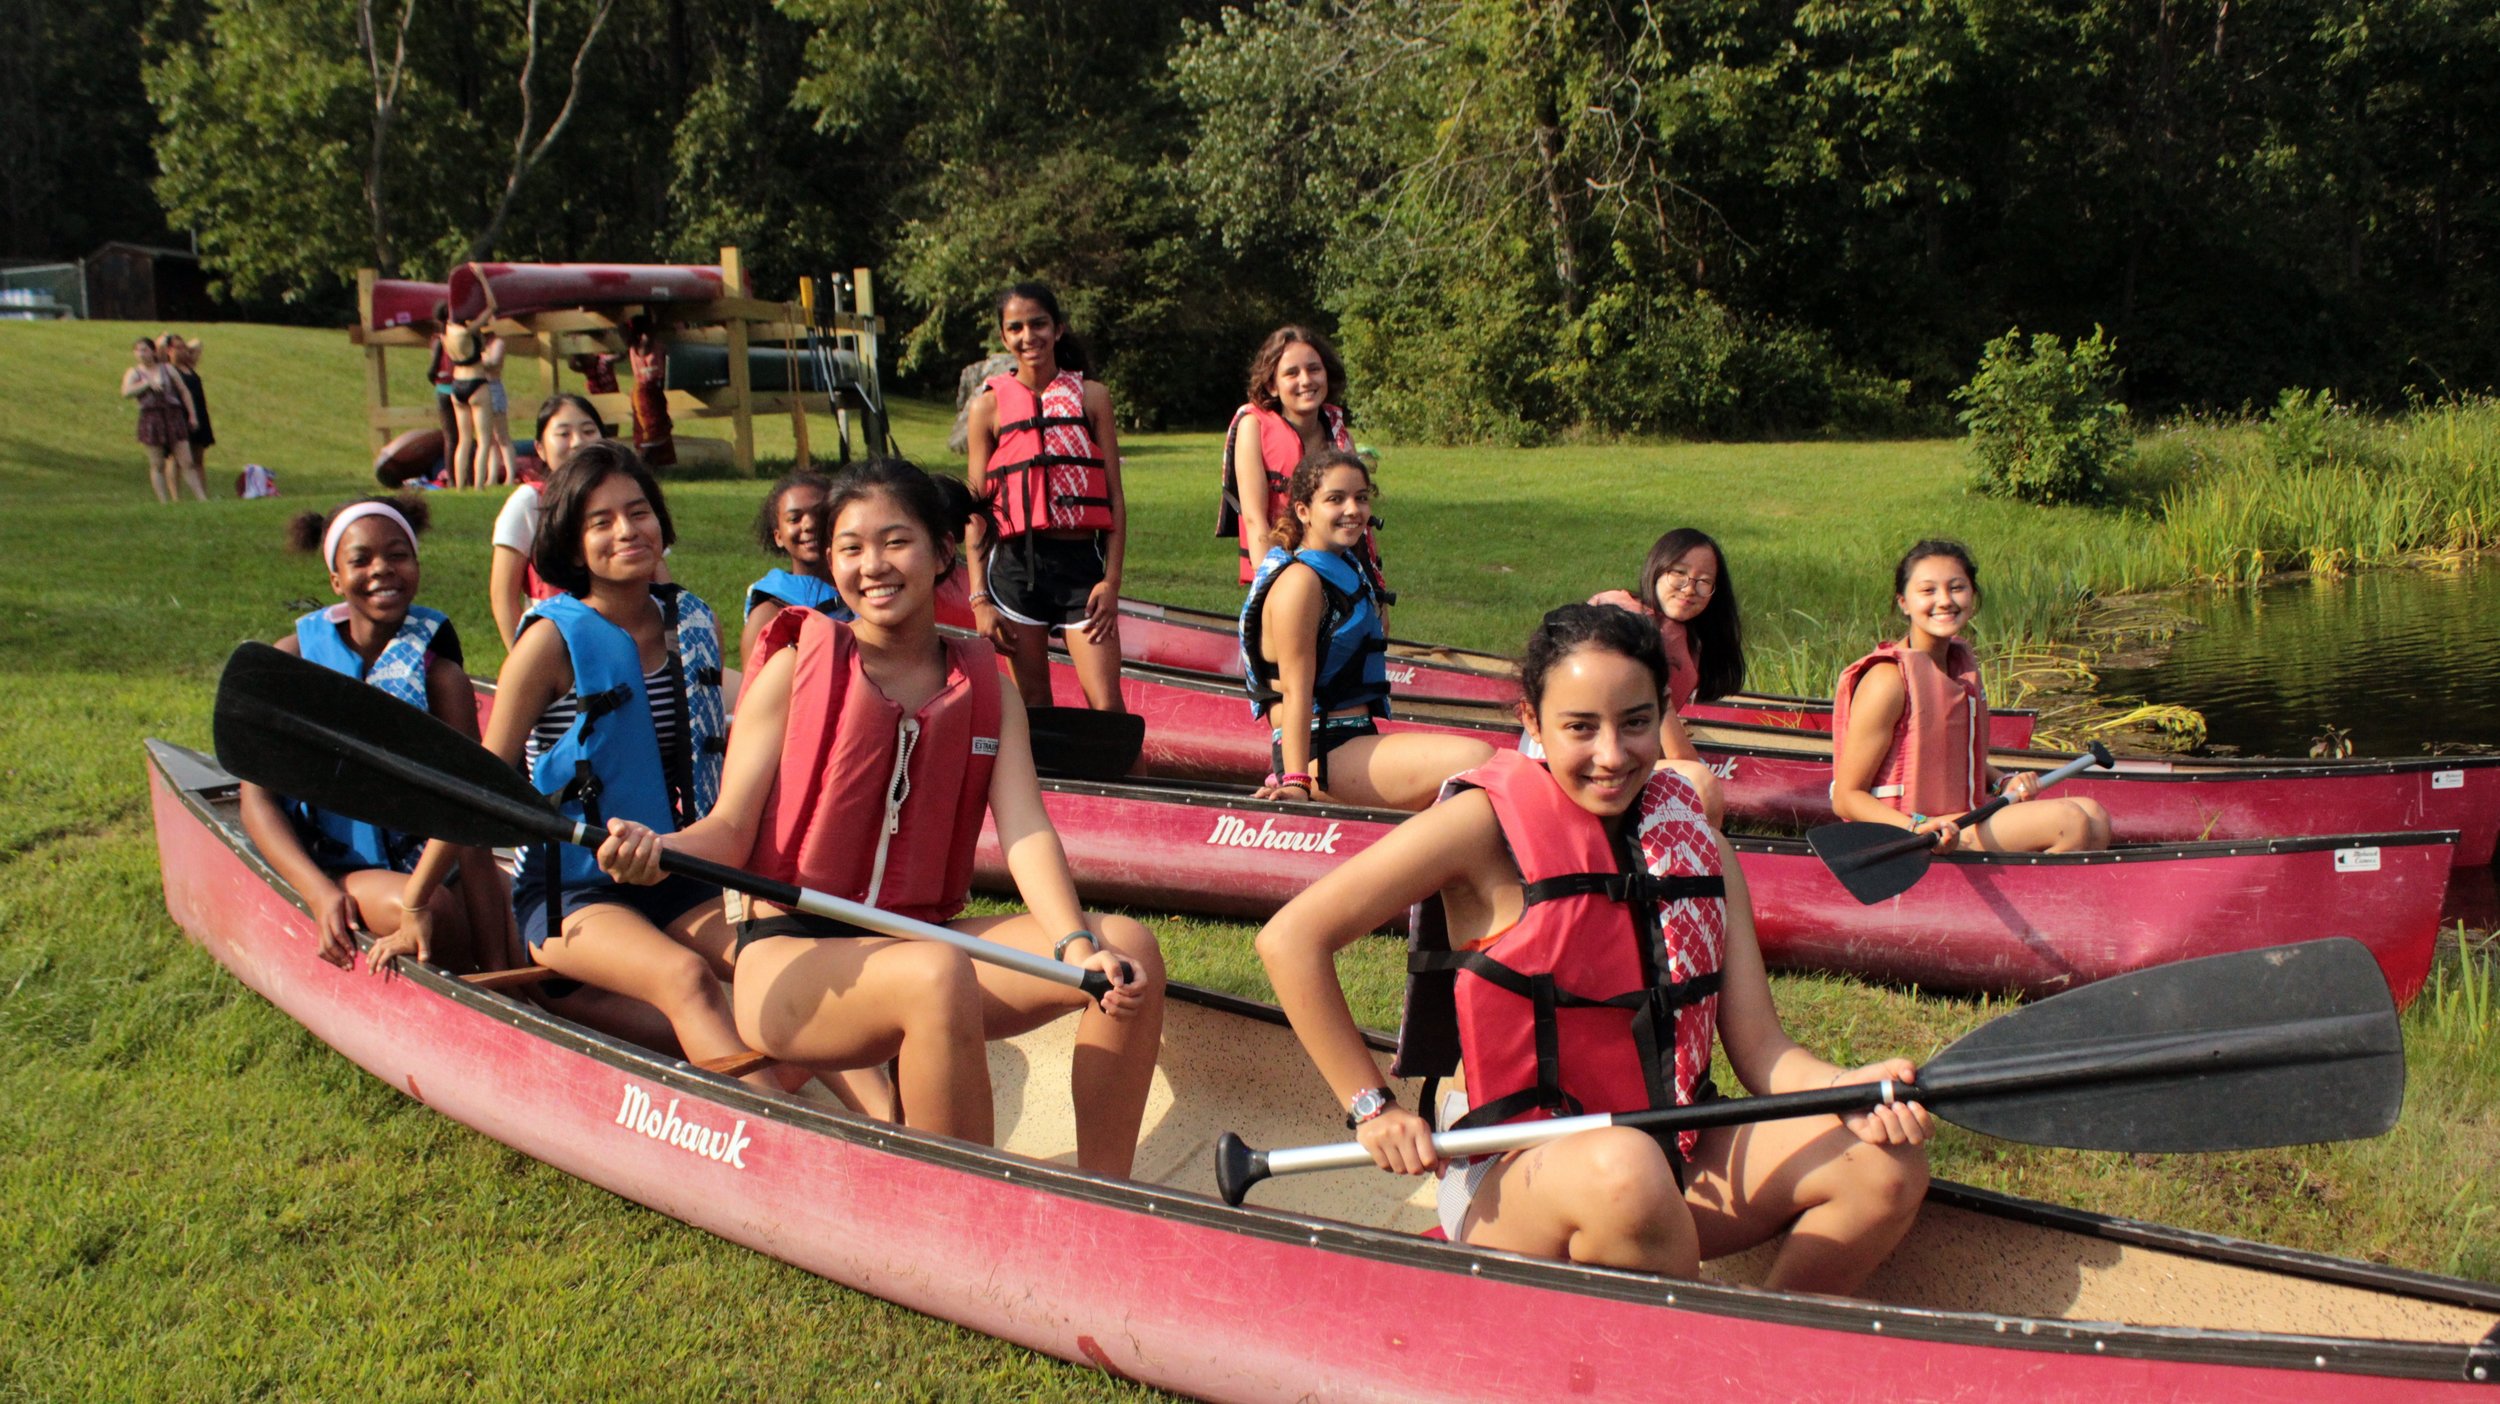  Campers get ready for canoeing in the lake! 